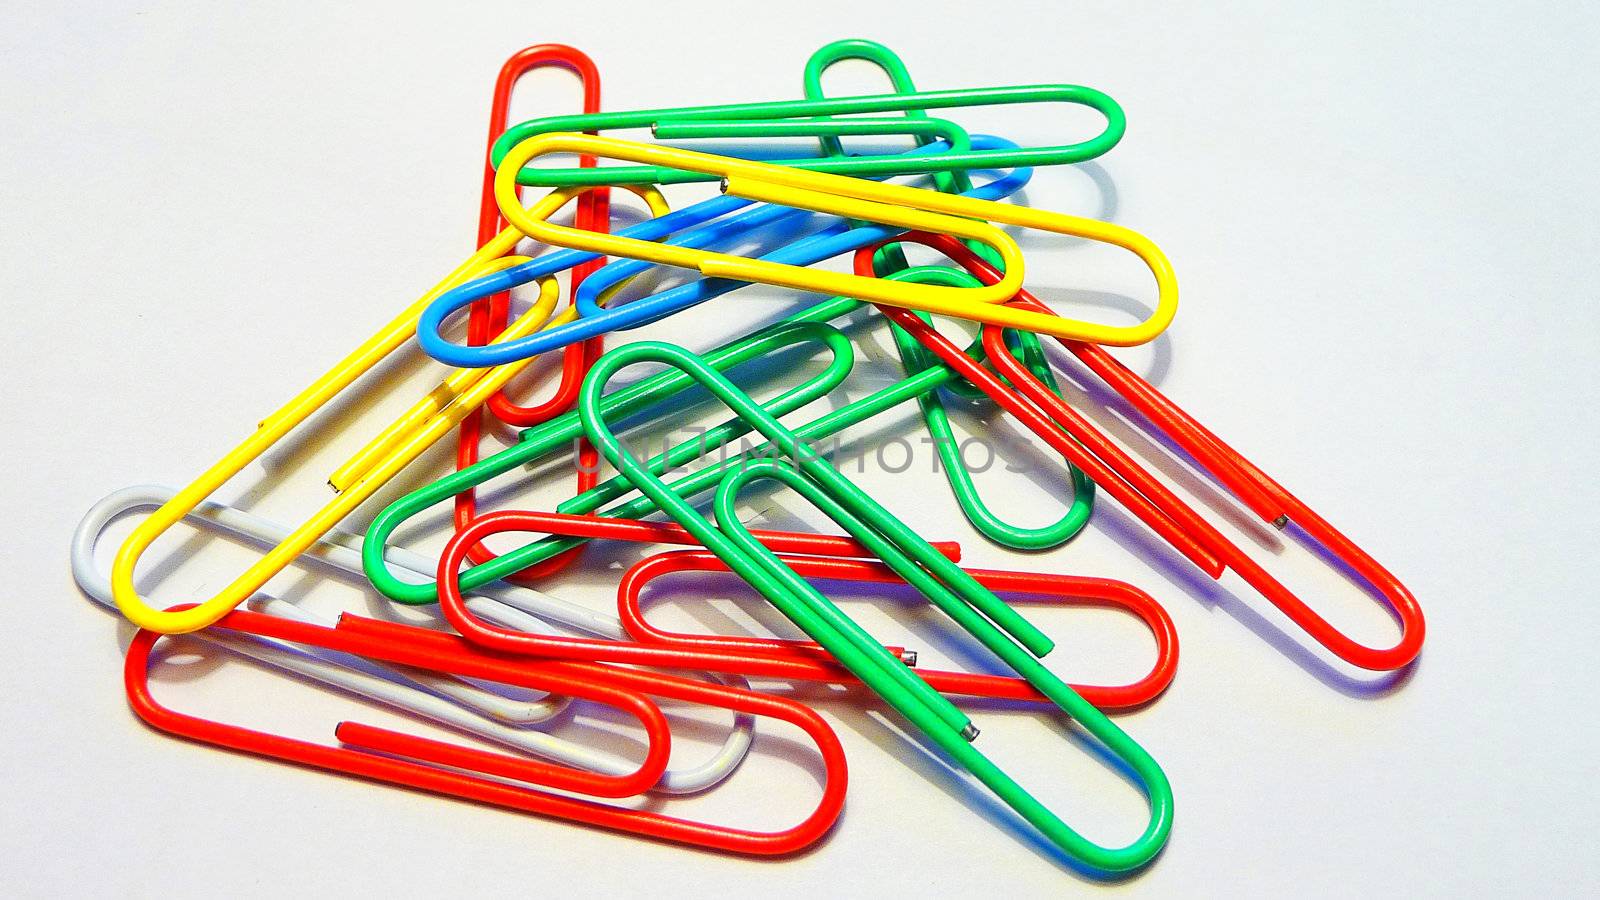 Paper clips by samum